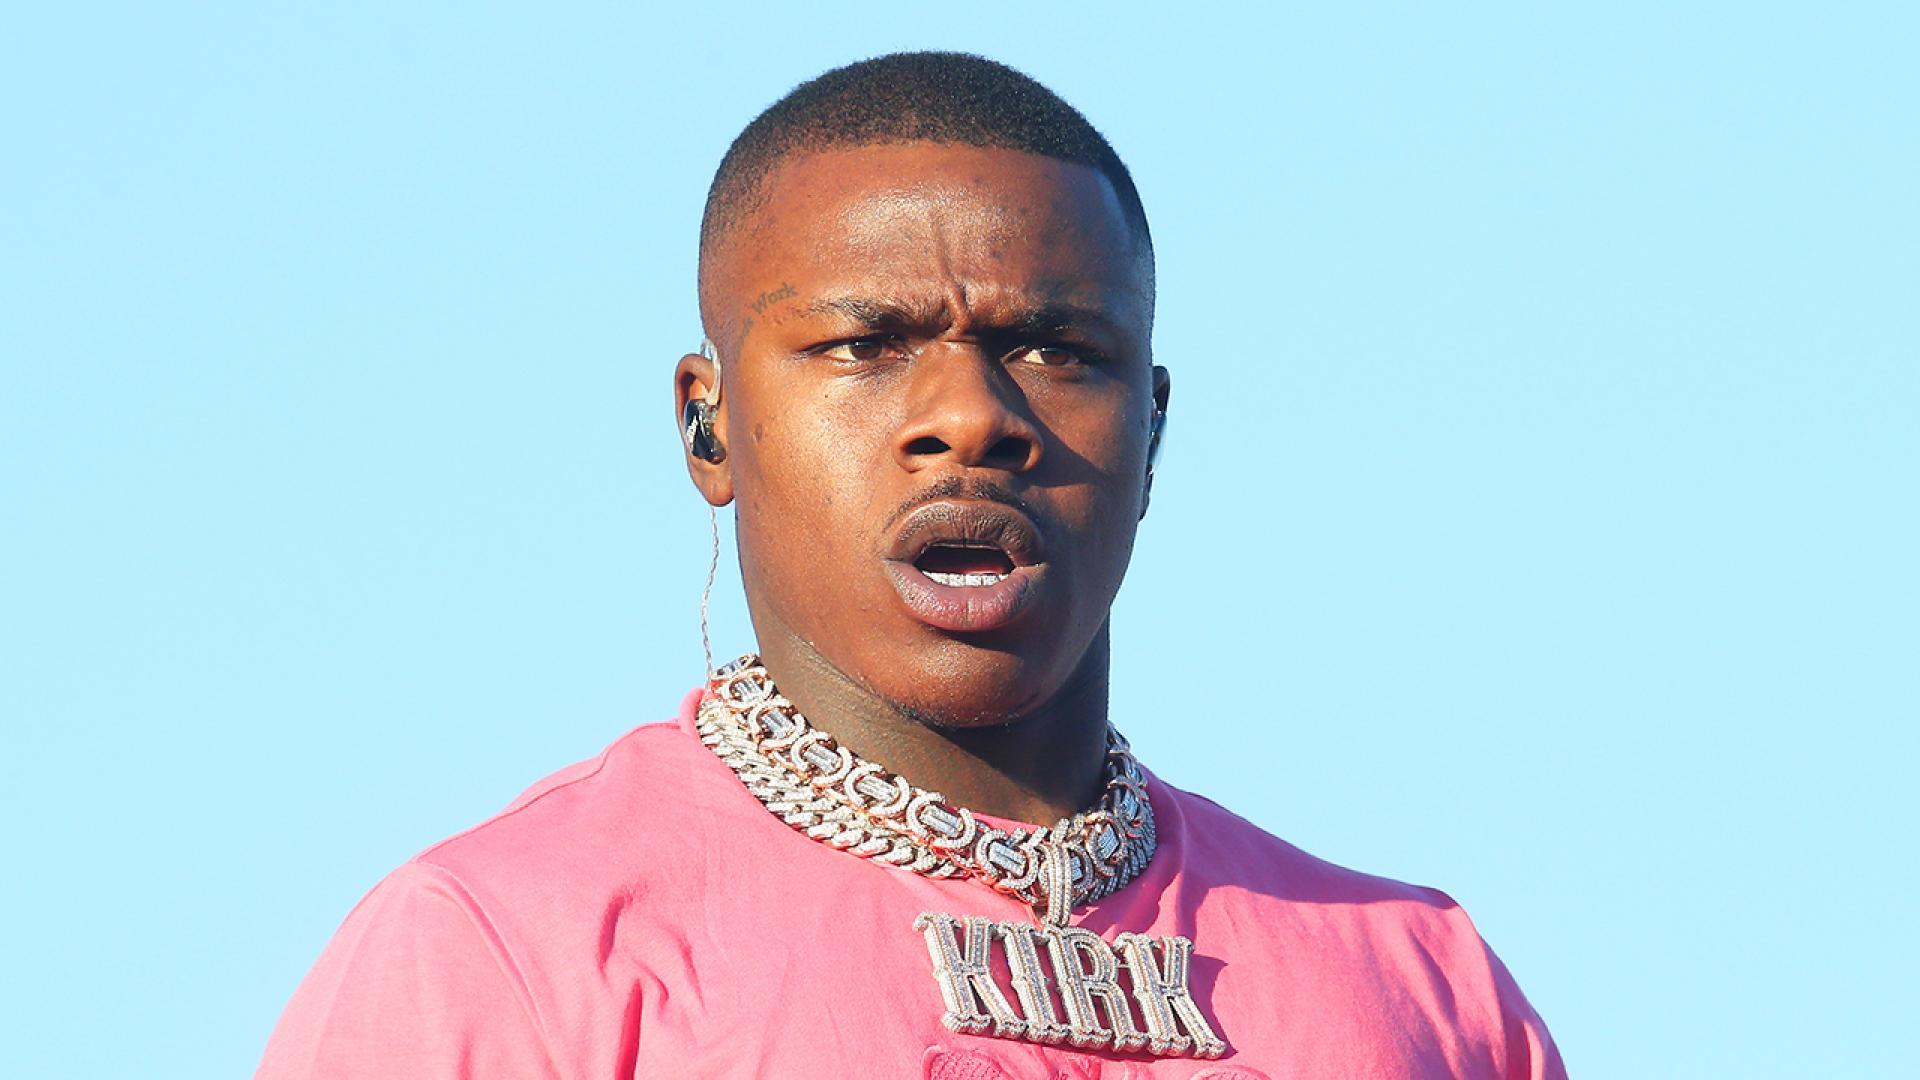 DaBaby Leaves Concert in Handcuffs, Hours After Handing Out